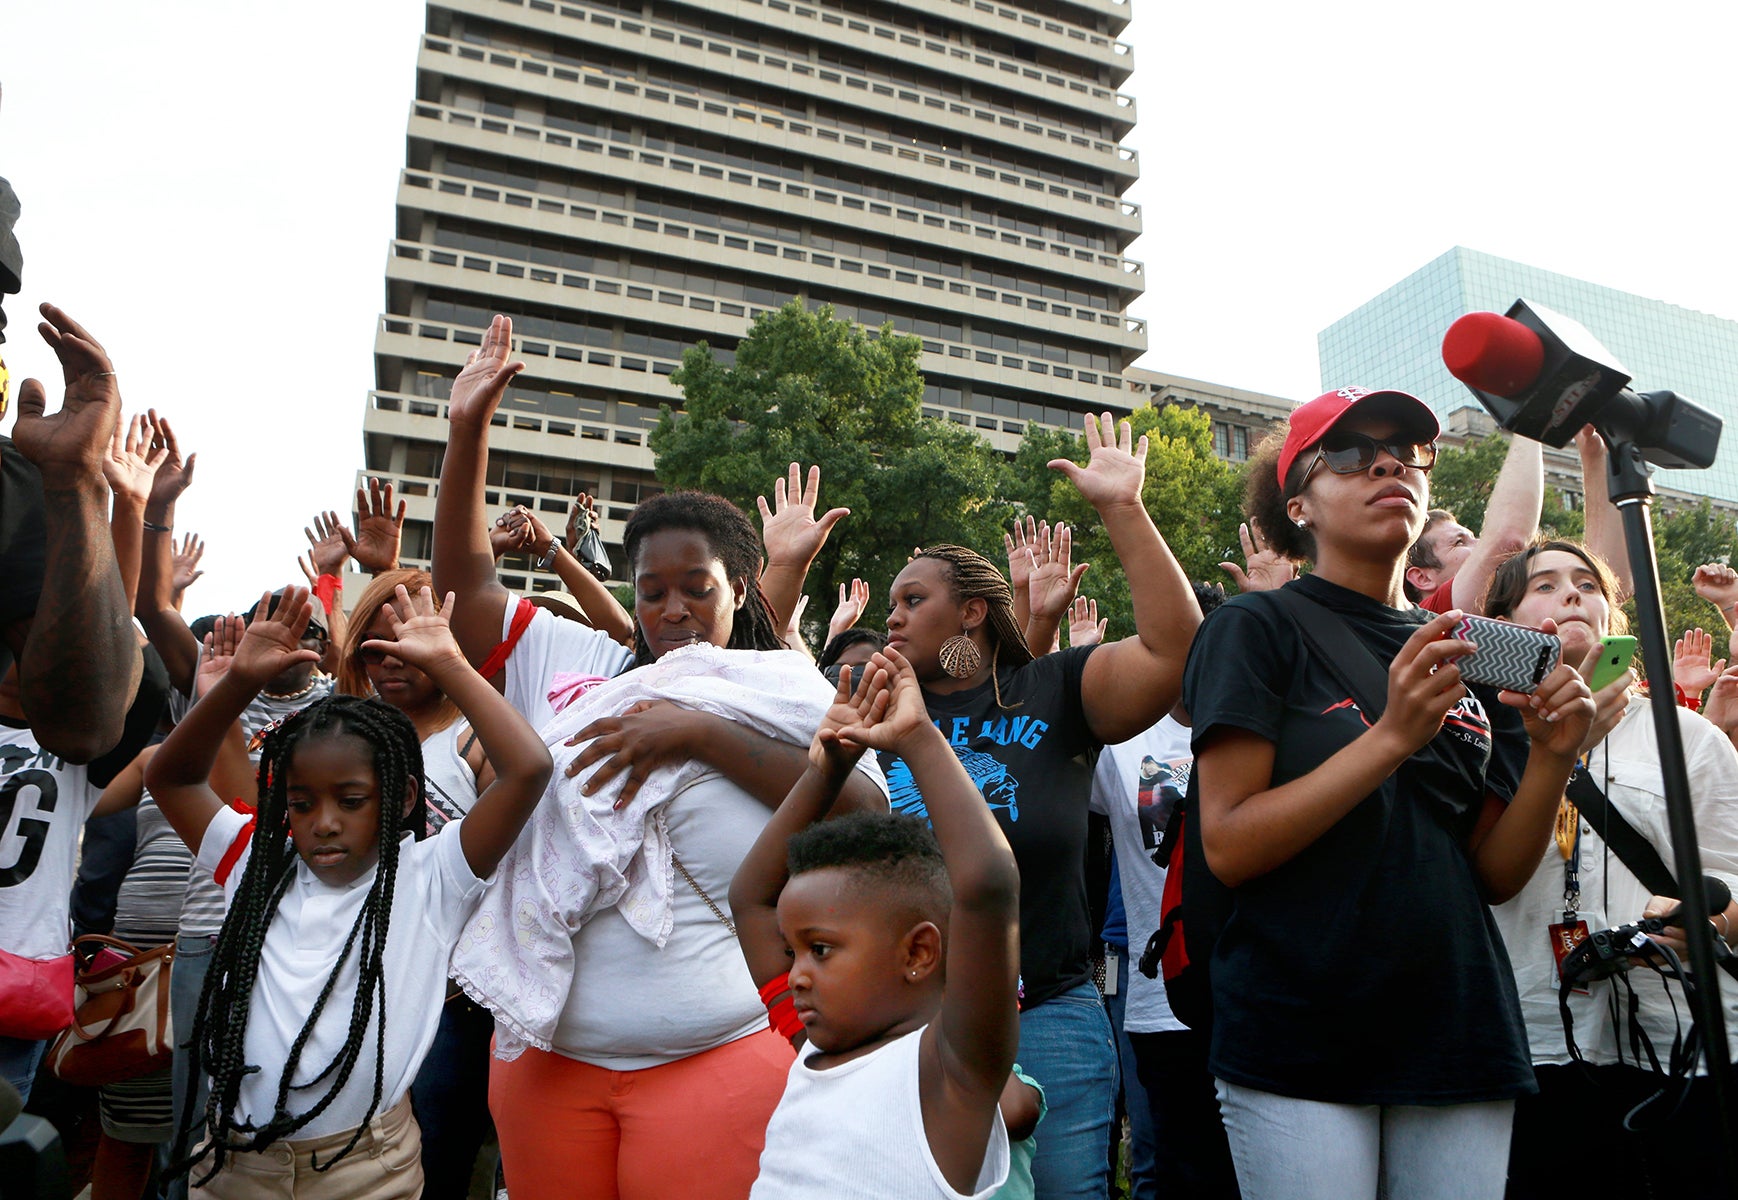 PHOTOS: National Moment of Silence in Honor of Michael Brown